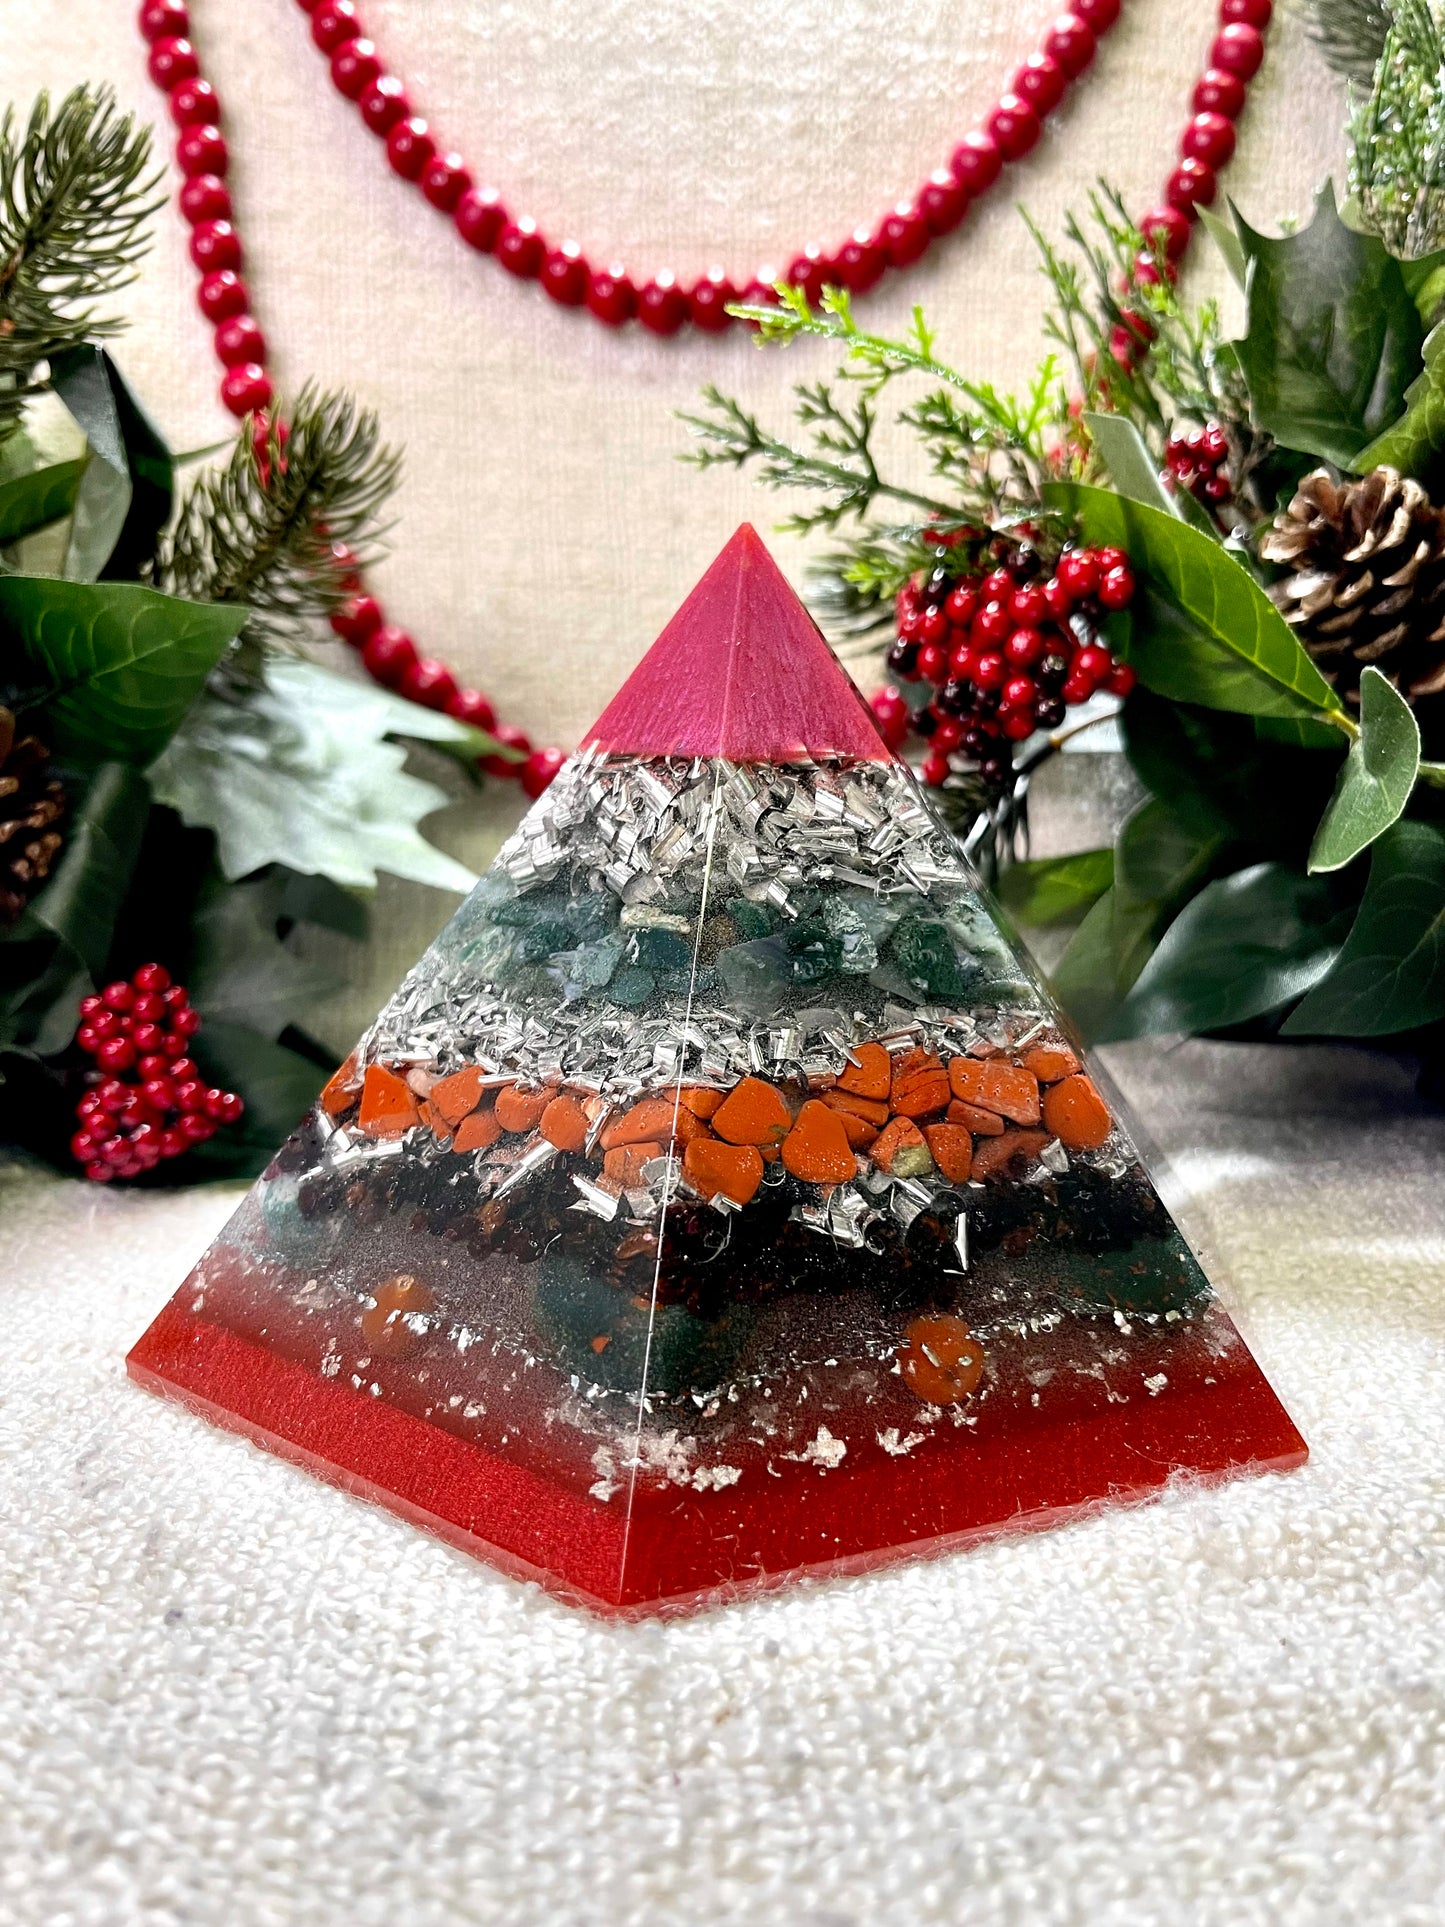 CHRISTMAS Special Edition Hexagonal Pyramid! - EMF Protector - Moss Agate, Red Jasper, Garnet, Bloodstone, Red Agate with Aluminium and Silver Metals.